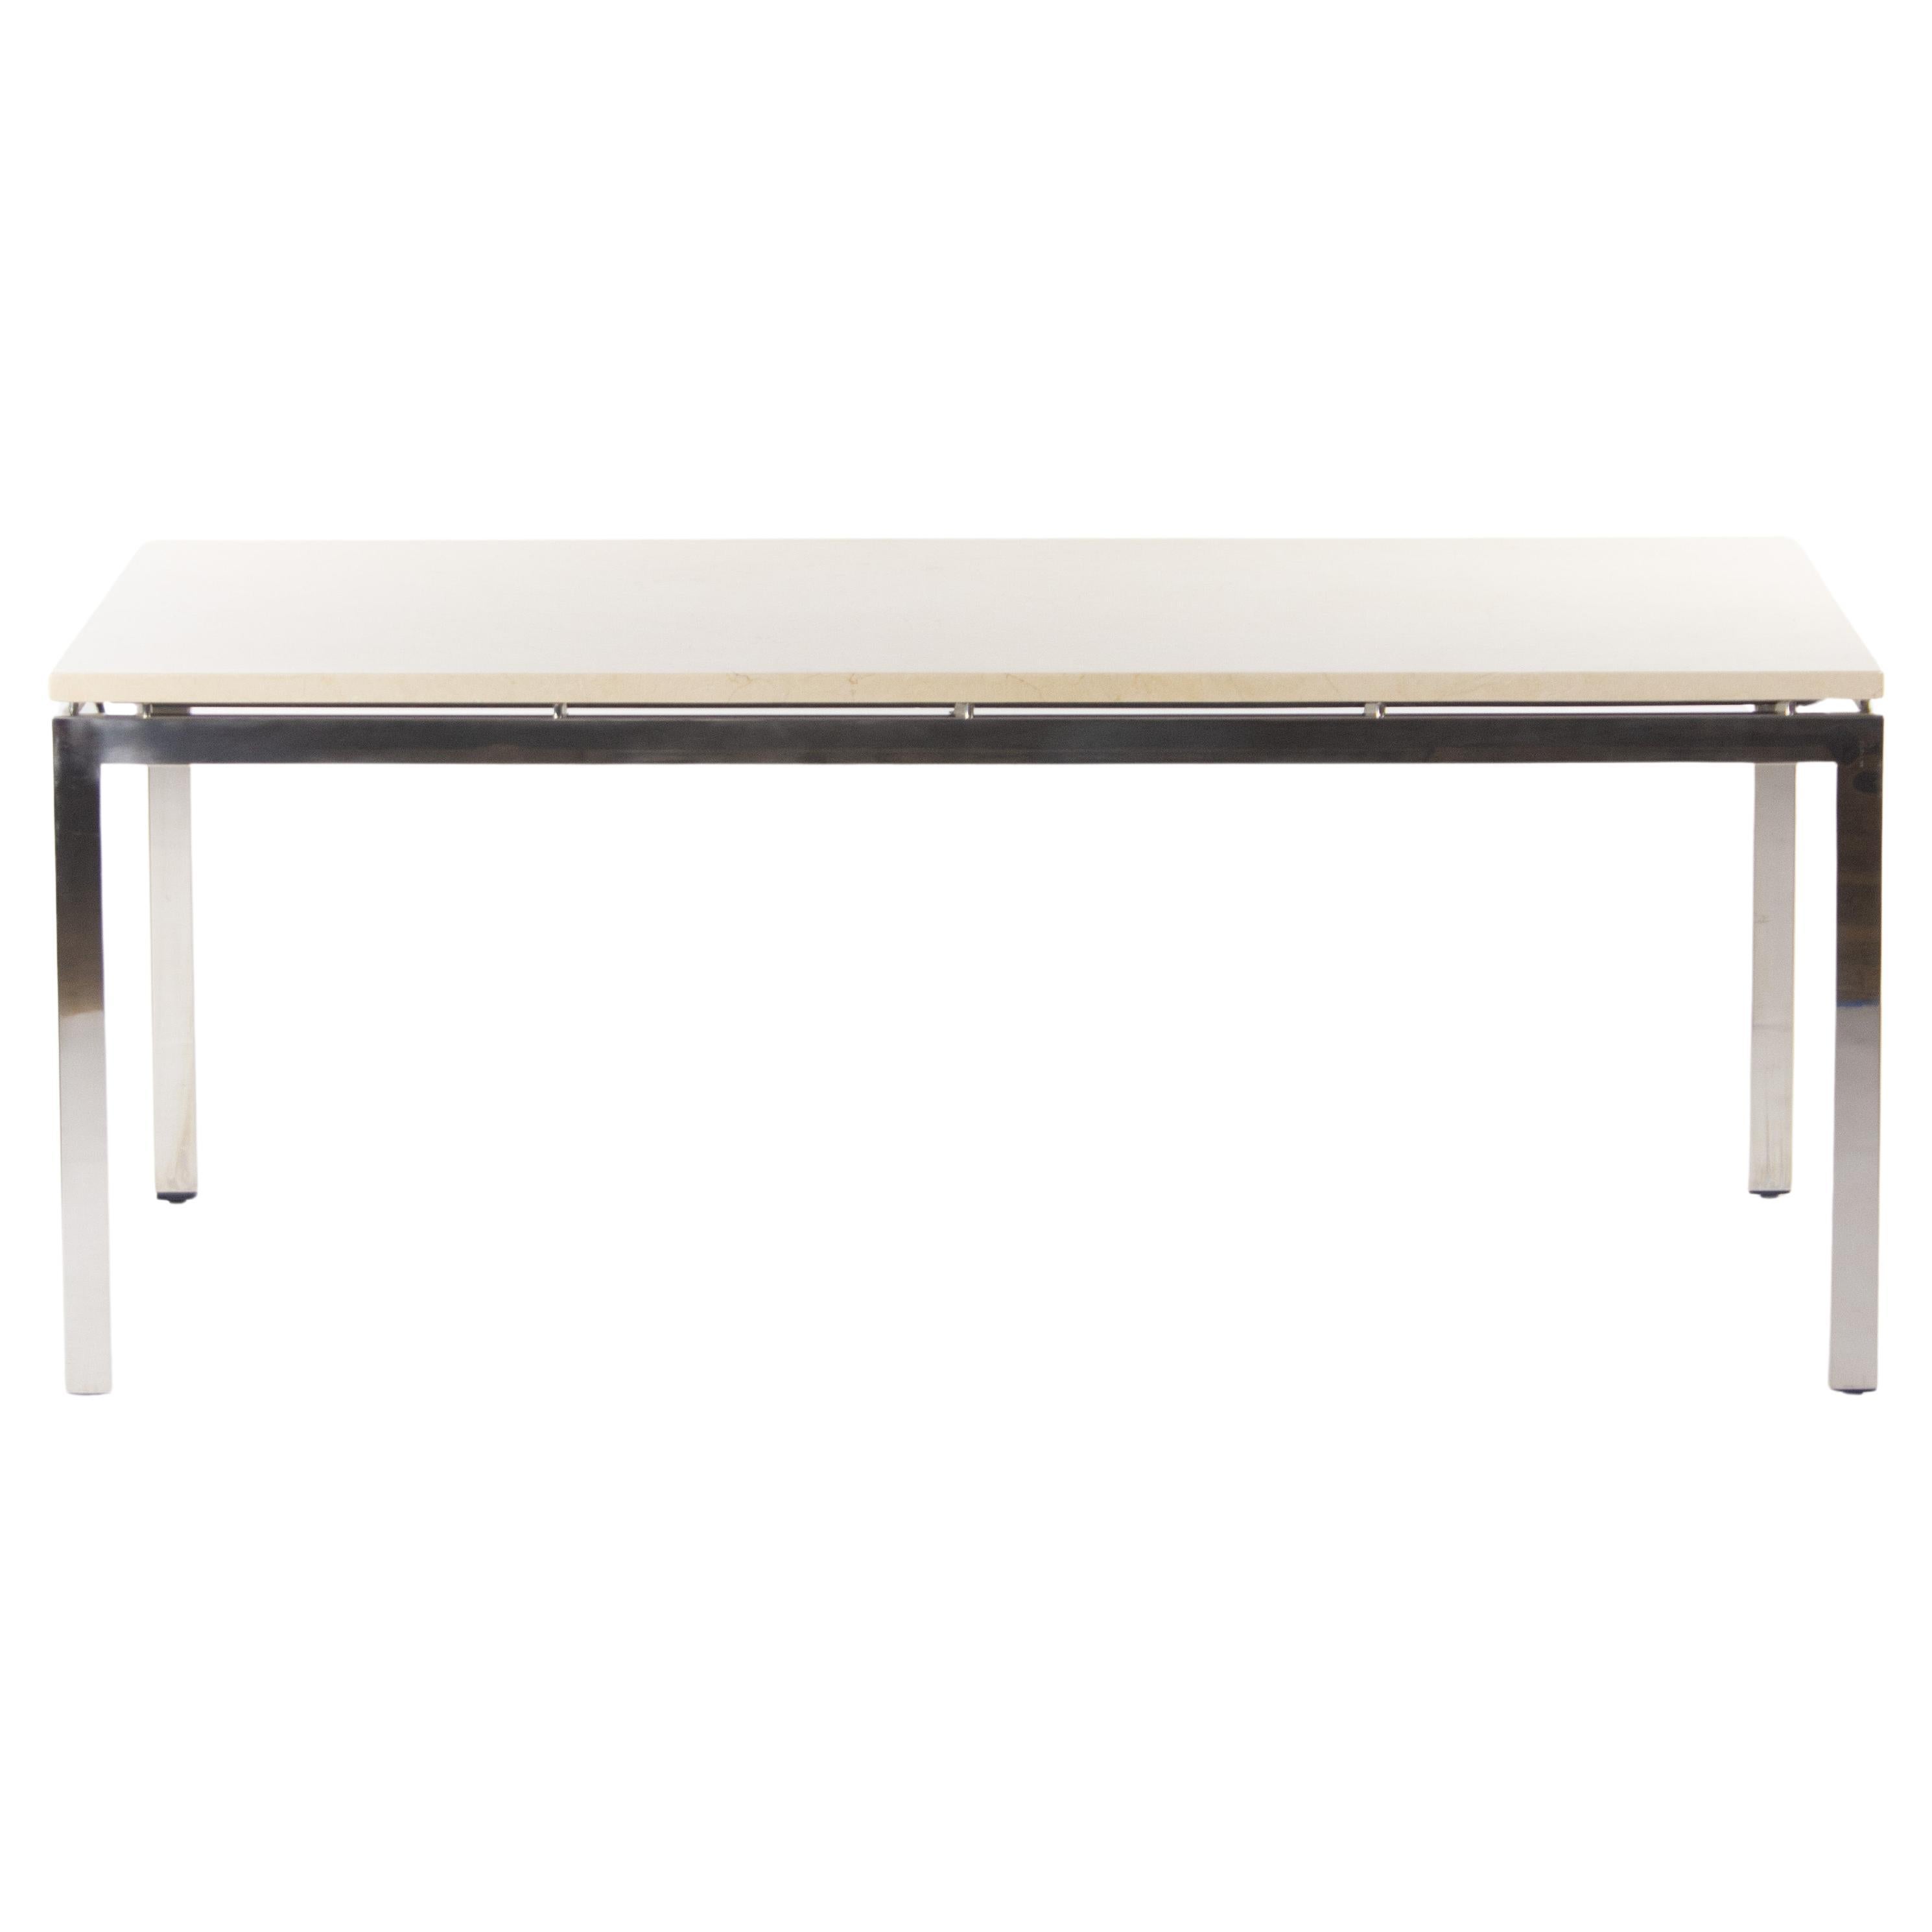 Granite Cumberland Meeting Dining Conference Table Beige w/ Steel Base For Sale